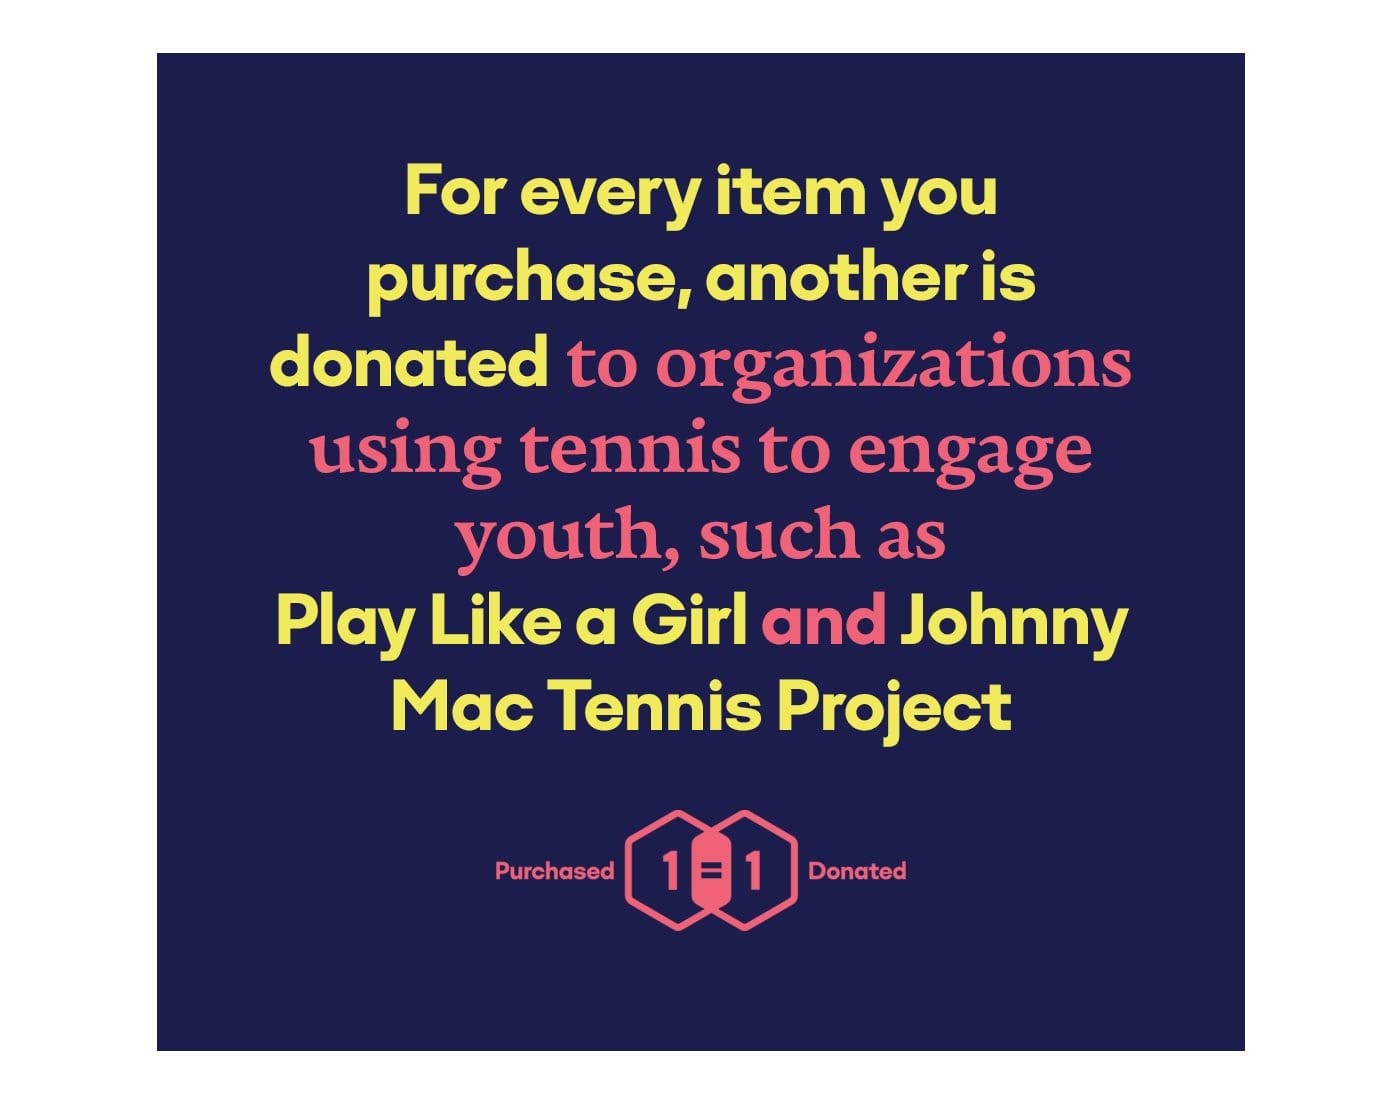 For every item you purchase, another is donated to organizations using tennis to engage youth, such as Play Like a Girl and Johnny Mac Tennis Project